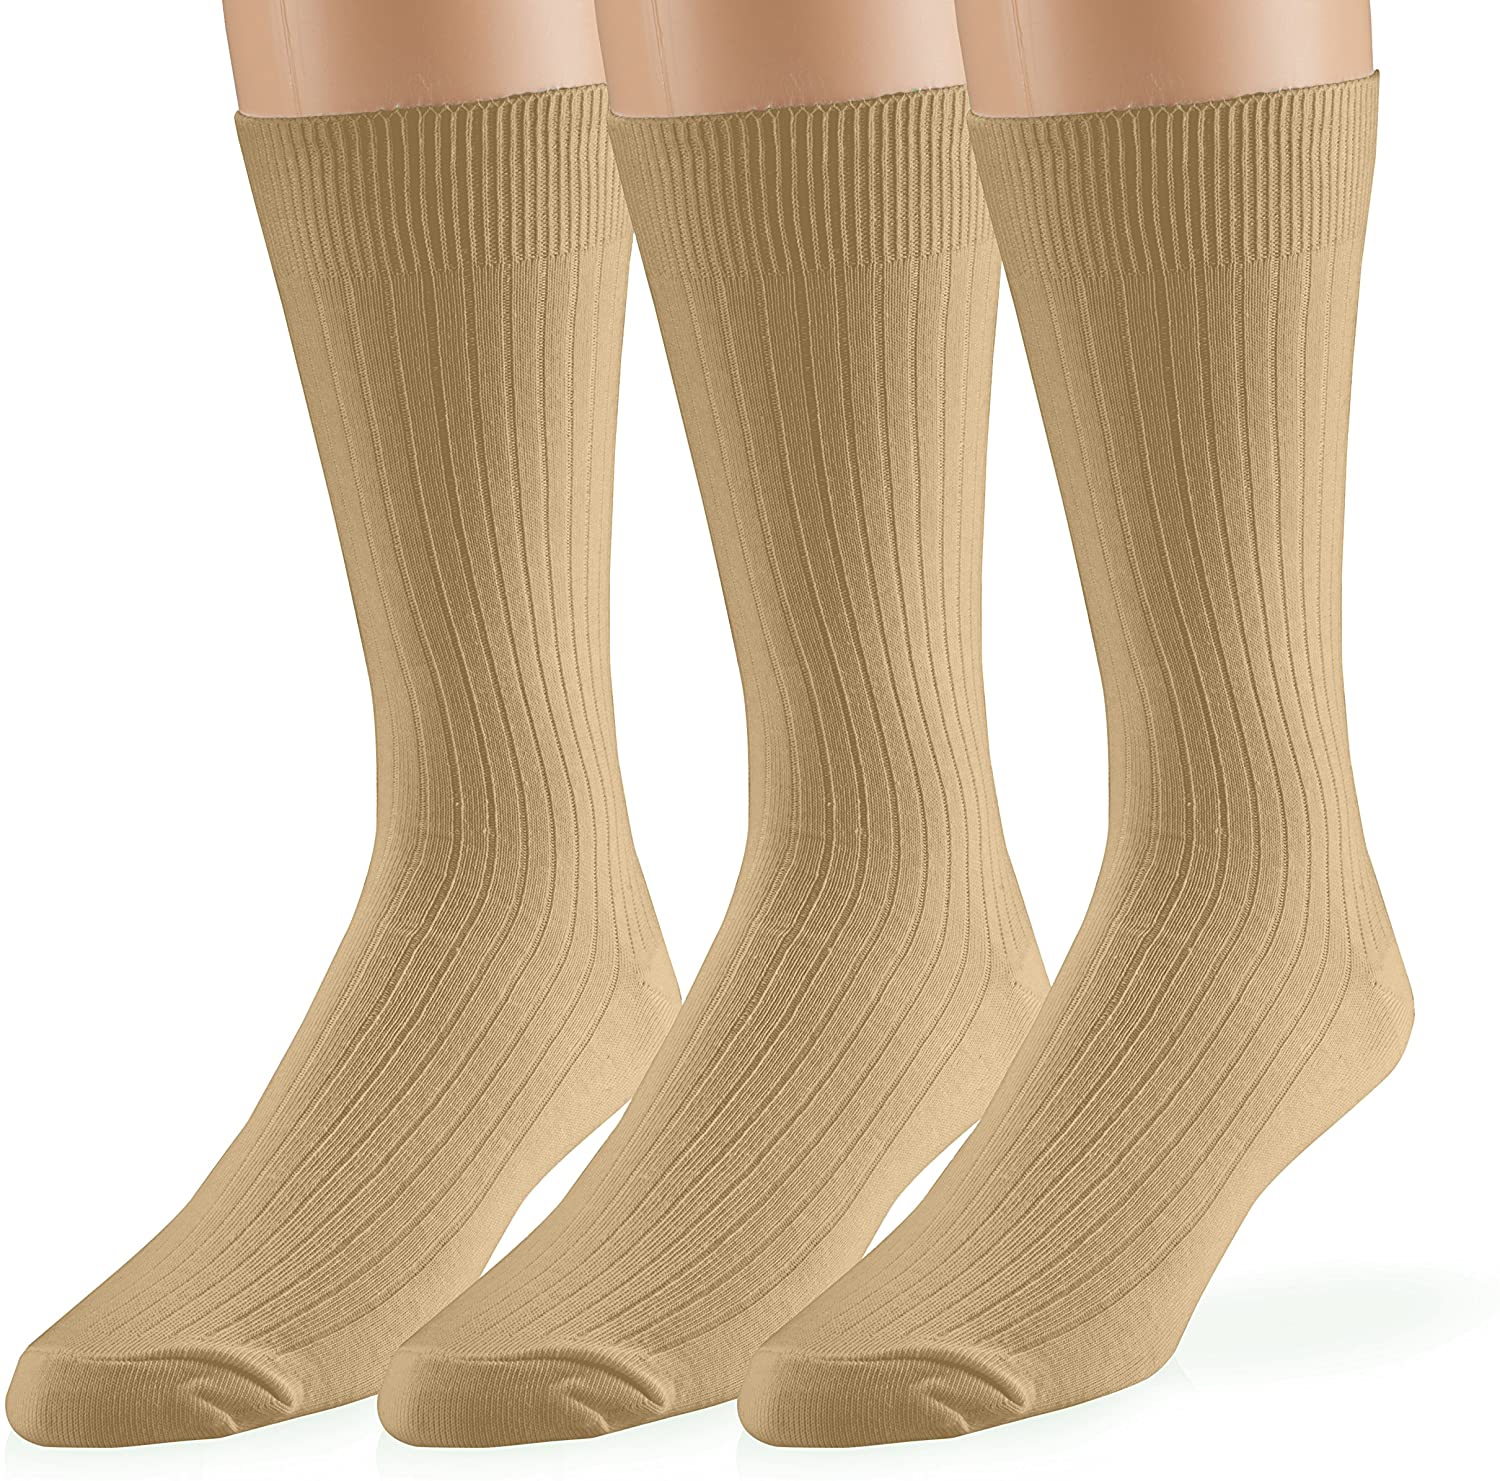 Big and Tall Available EMEM Men's Ribbed Cotton Classic Crew Dress Socks 3-Pack 